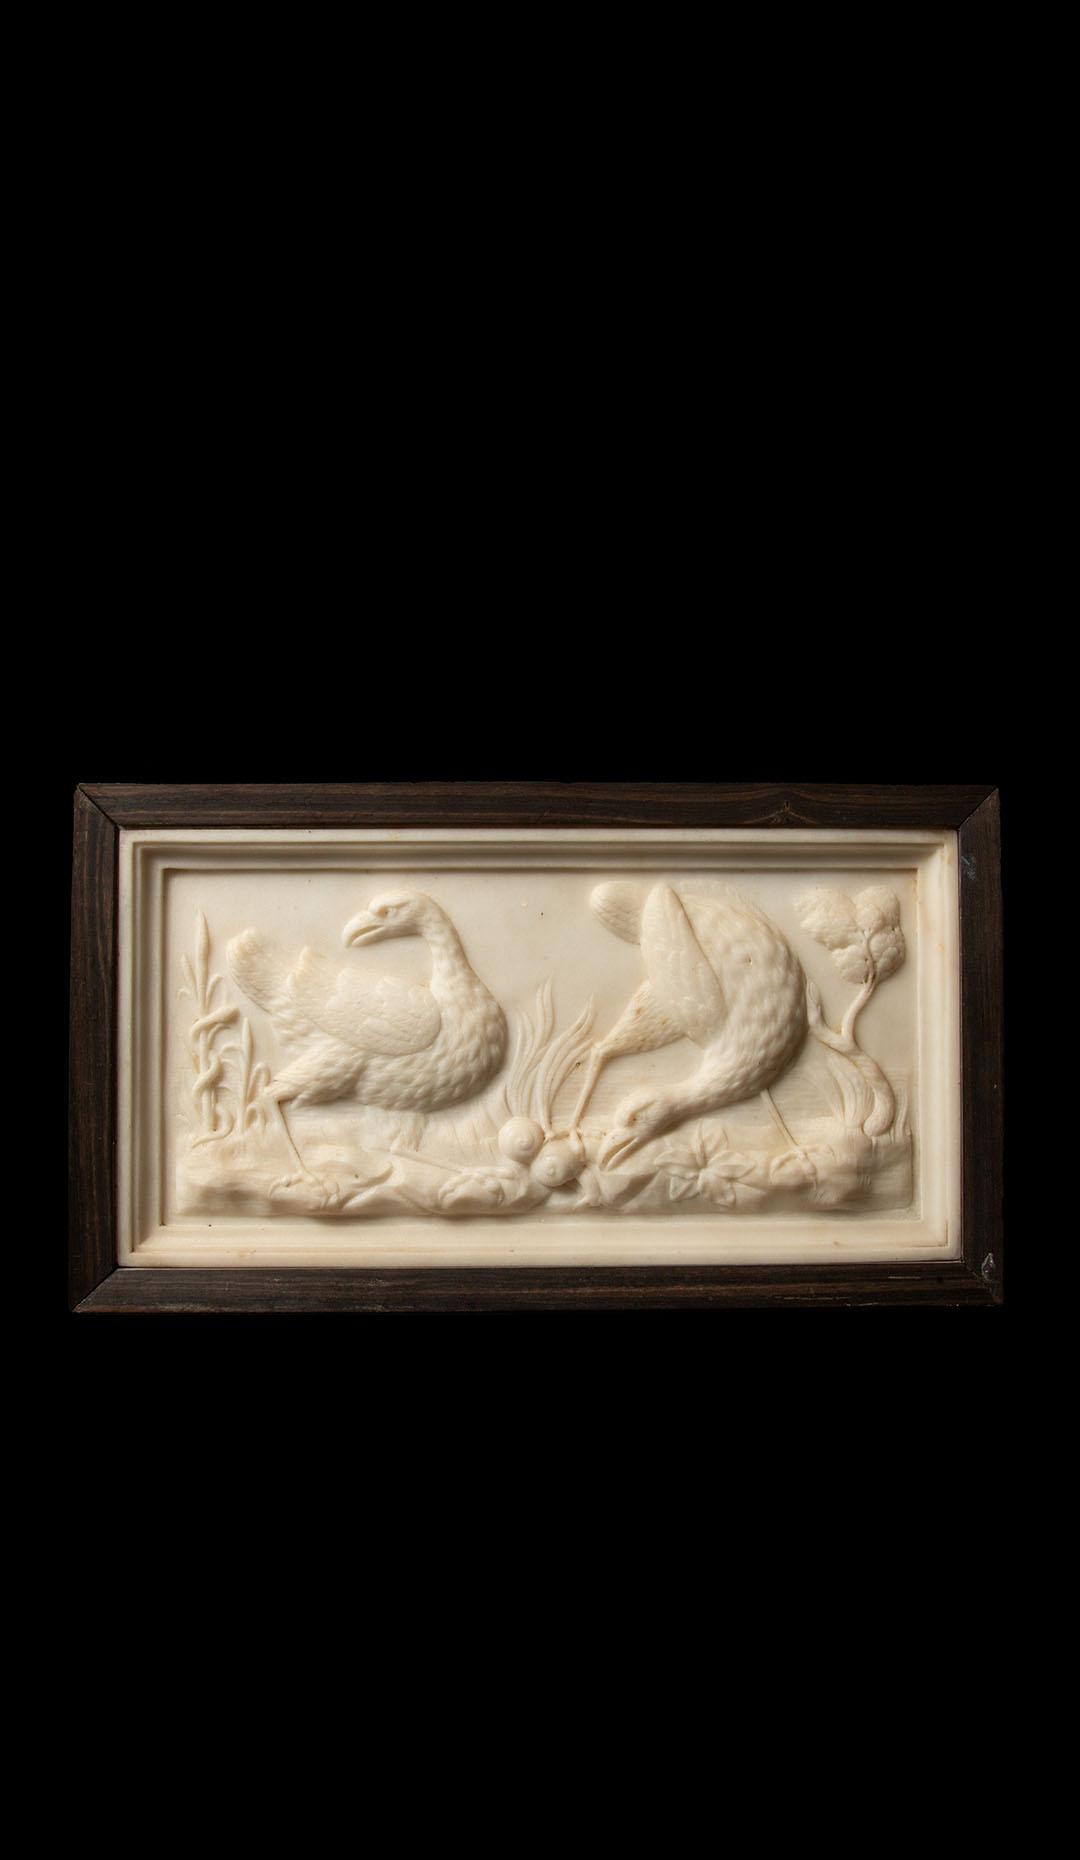 19th-Century Italian Marble Relief: Majestic Bustards in Exquisite Detail